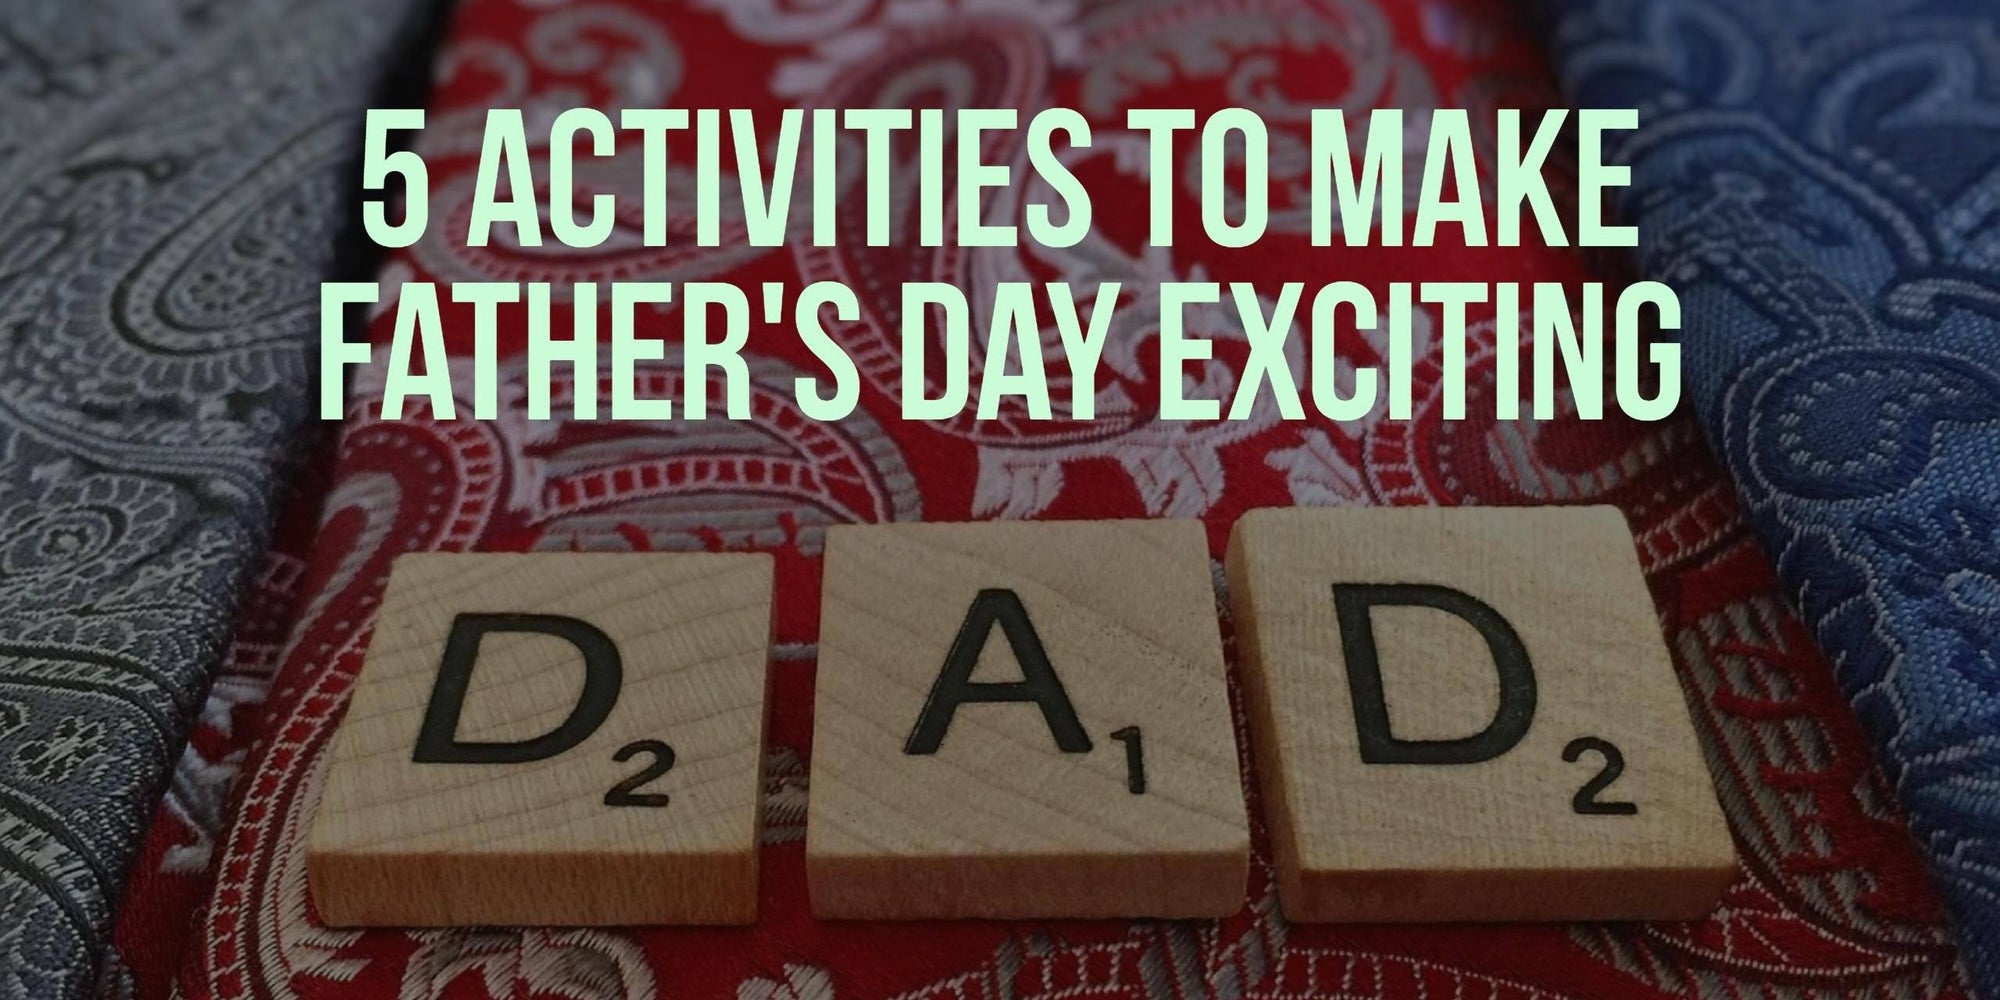 Activities to Make Father's Day Exciting